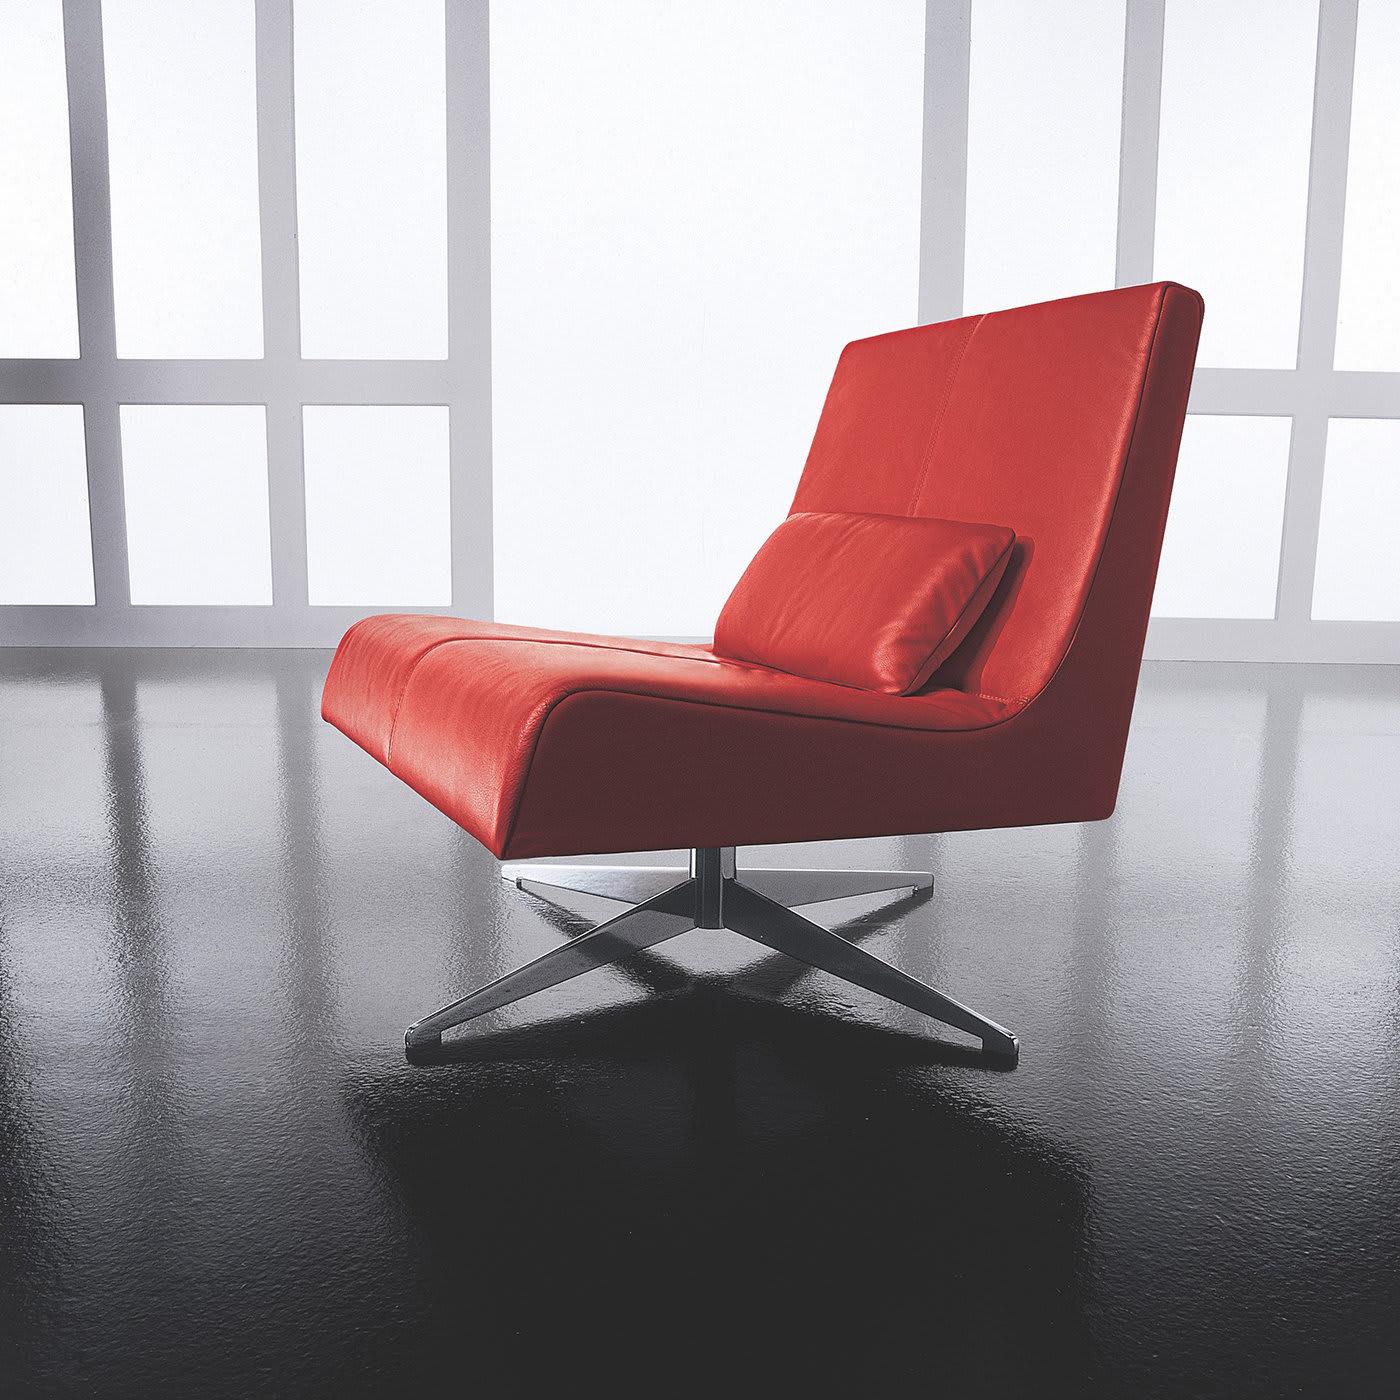 Covered in bold, red, genuine leather, this padded swivel chair features a four-spoked, stainless steel base and beech plywood structure. Its wide, spacious design guarantees maximum comfort and is perfect for a residential or office environment. A